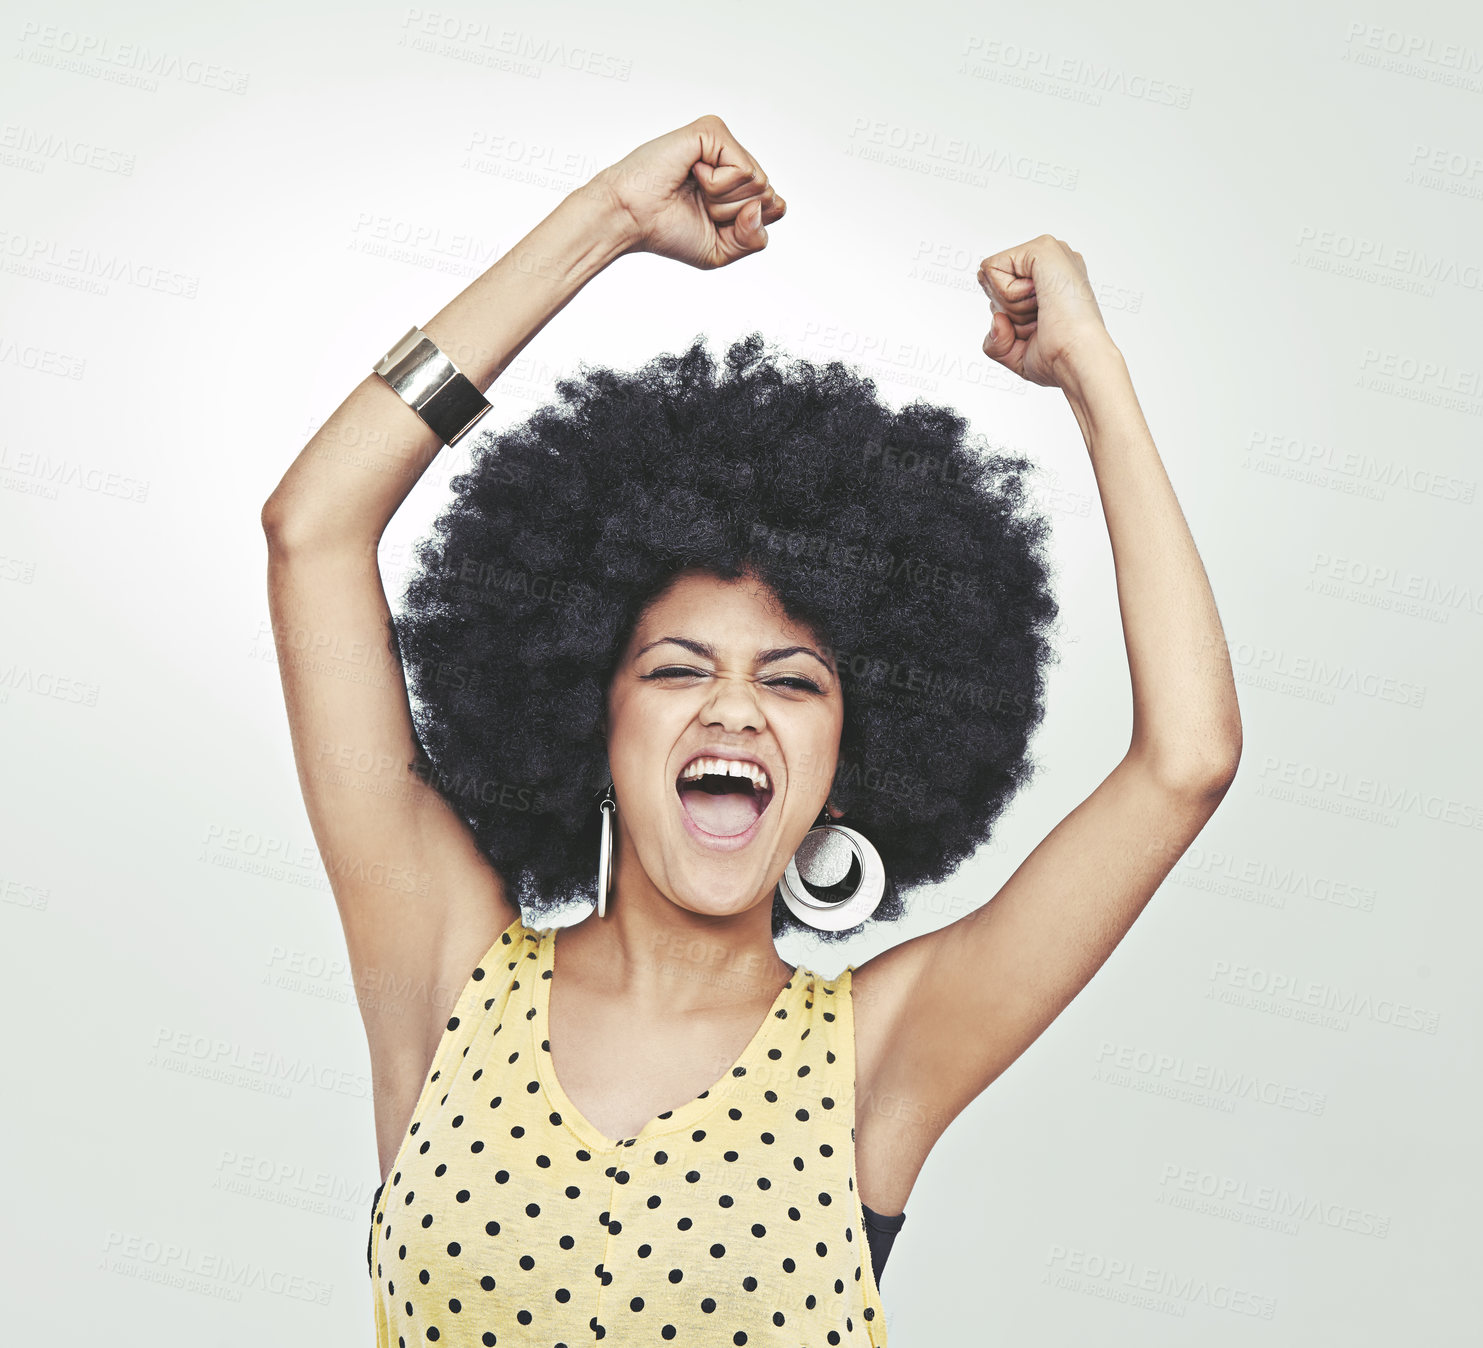 Buy stock photo Studio shot of a young woman in a retro outfit shouting with excitement while dancing